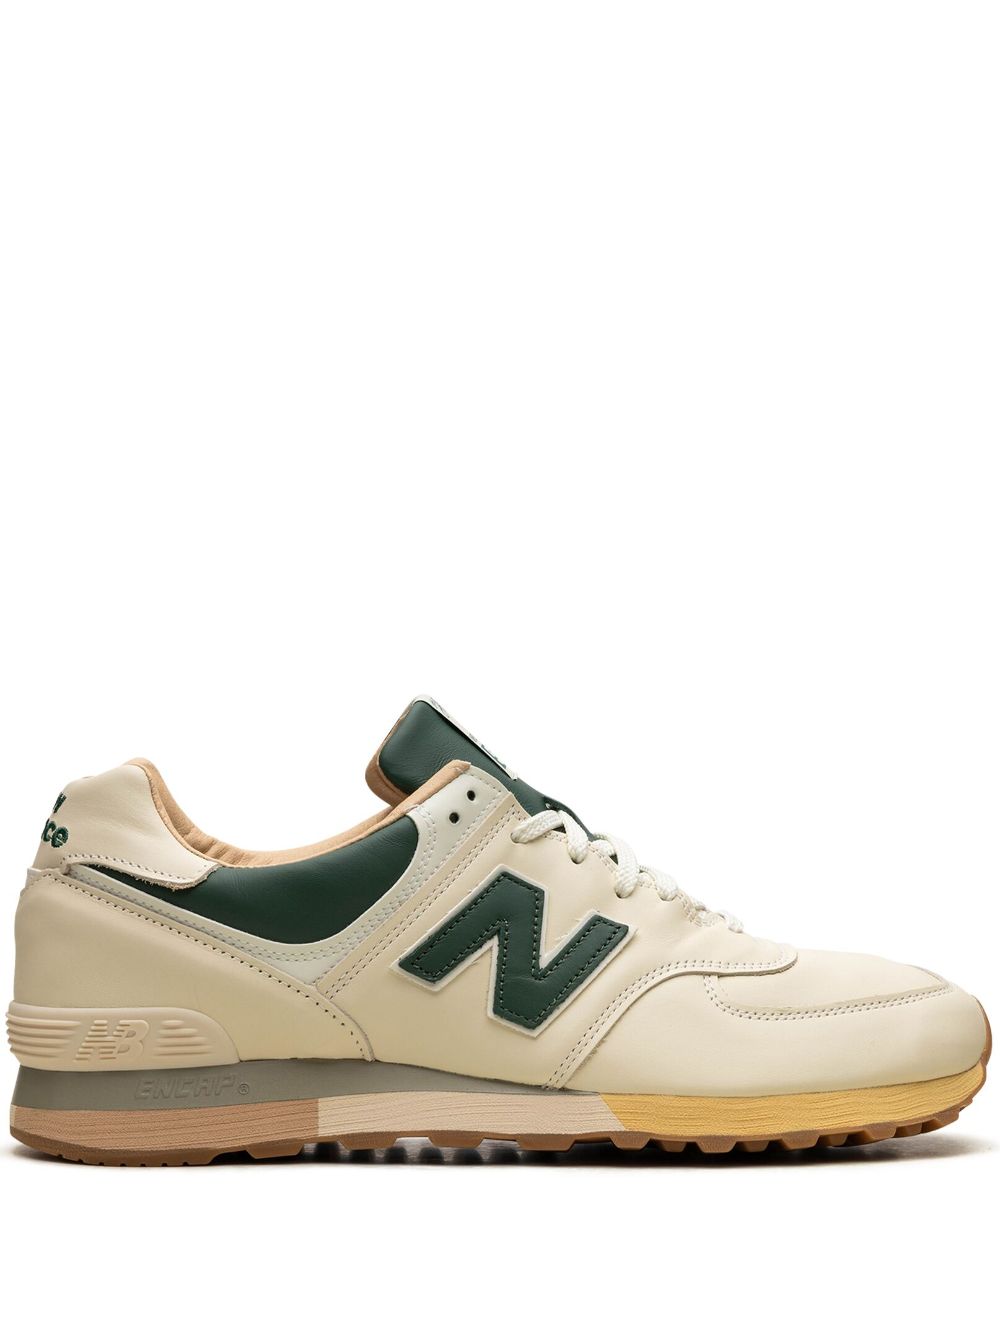 New Balance x The Apartment MADE in UK 576 "Agave - Antique White/Evergreen/London Fog" sneakers - Beige